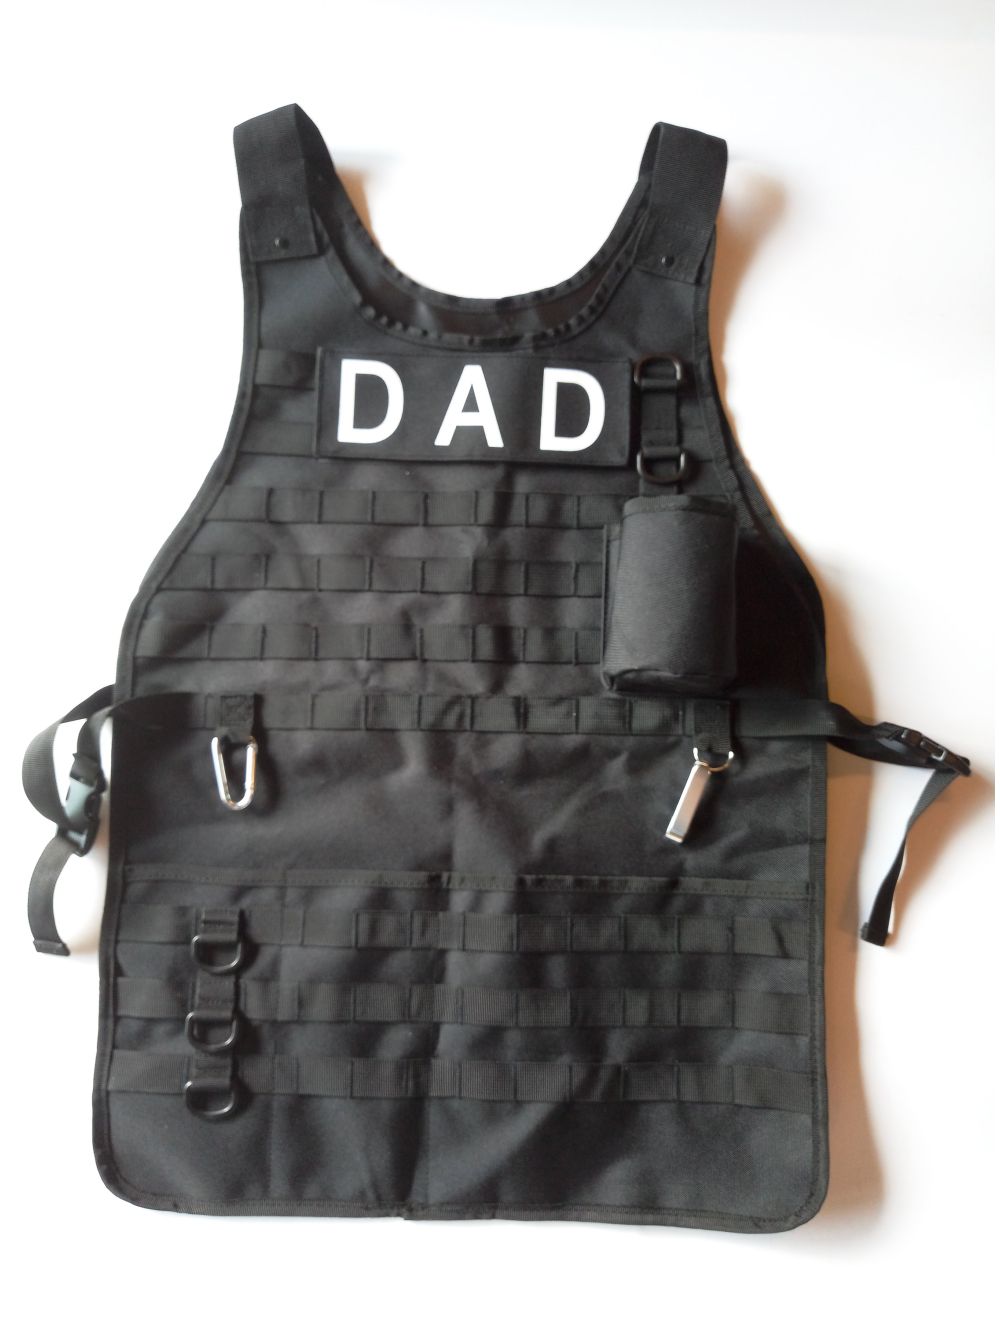 Tactical BBQ Apron w/ Carabiner and Bottle Opener